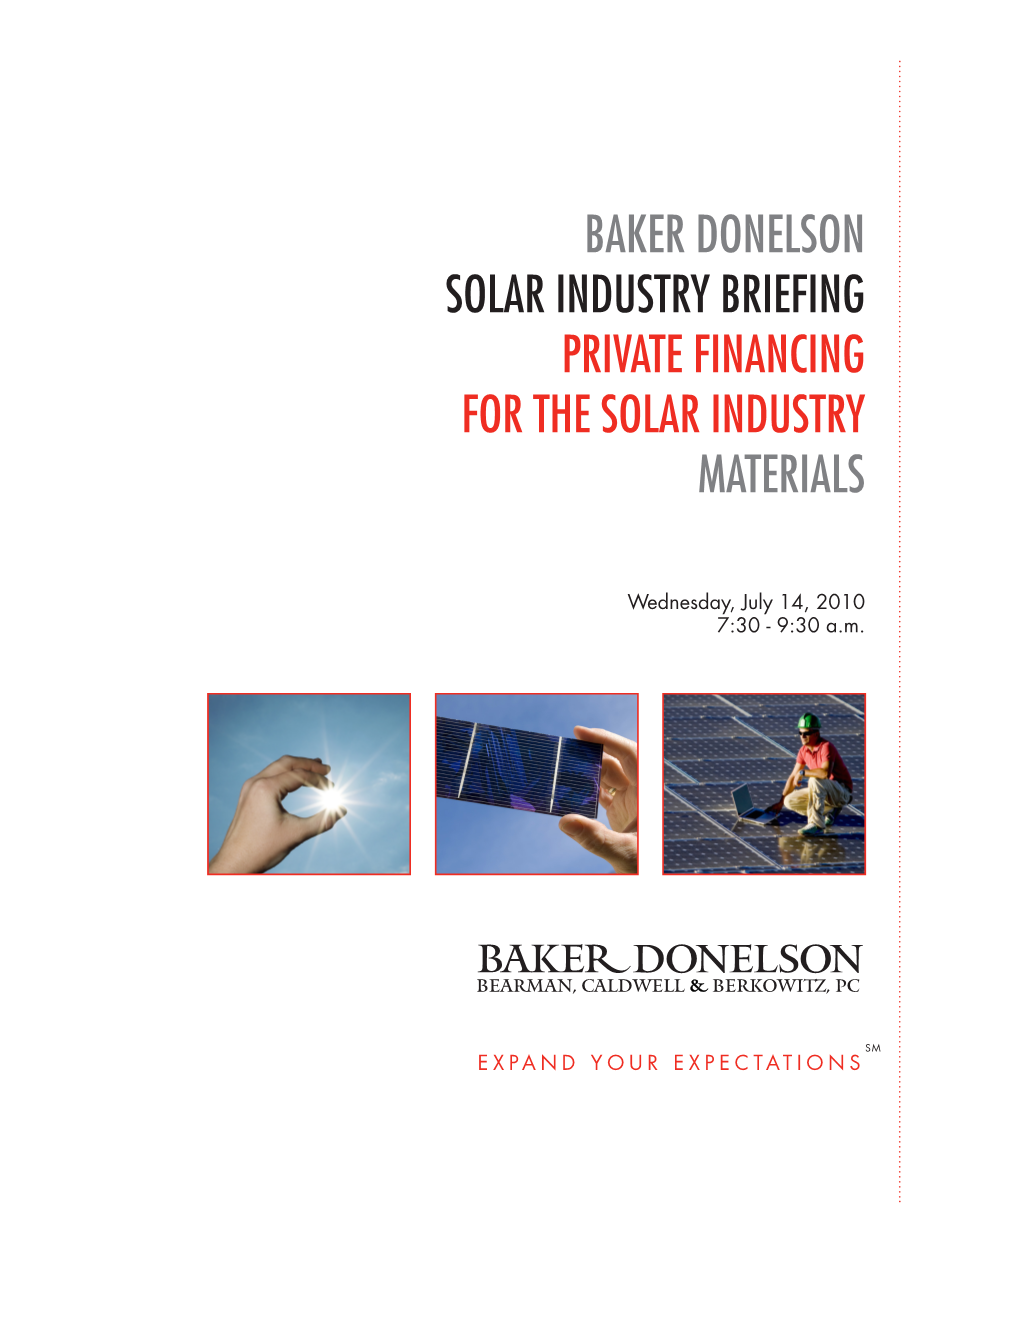 Private Financing for the Solar Industry Materials